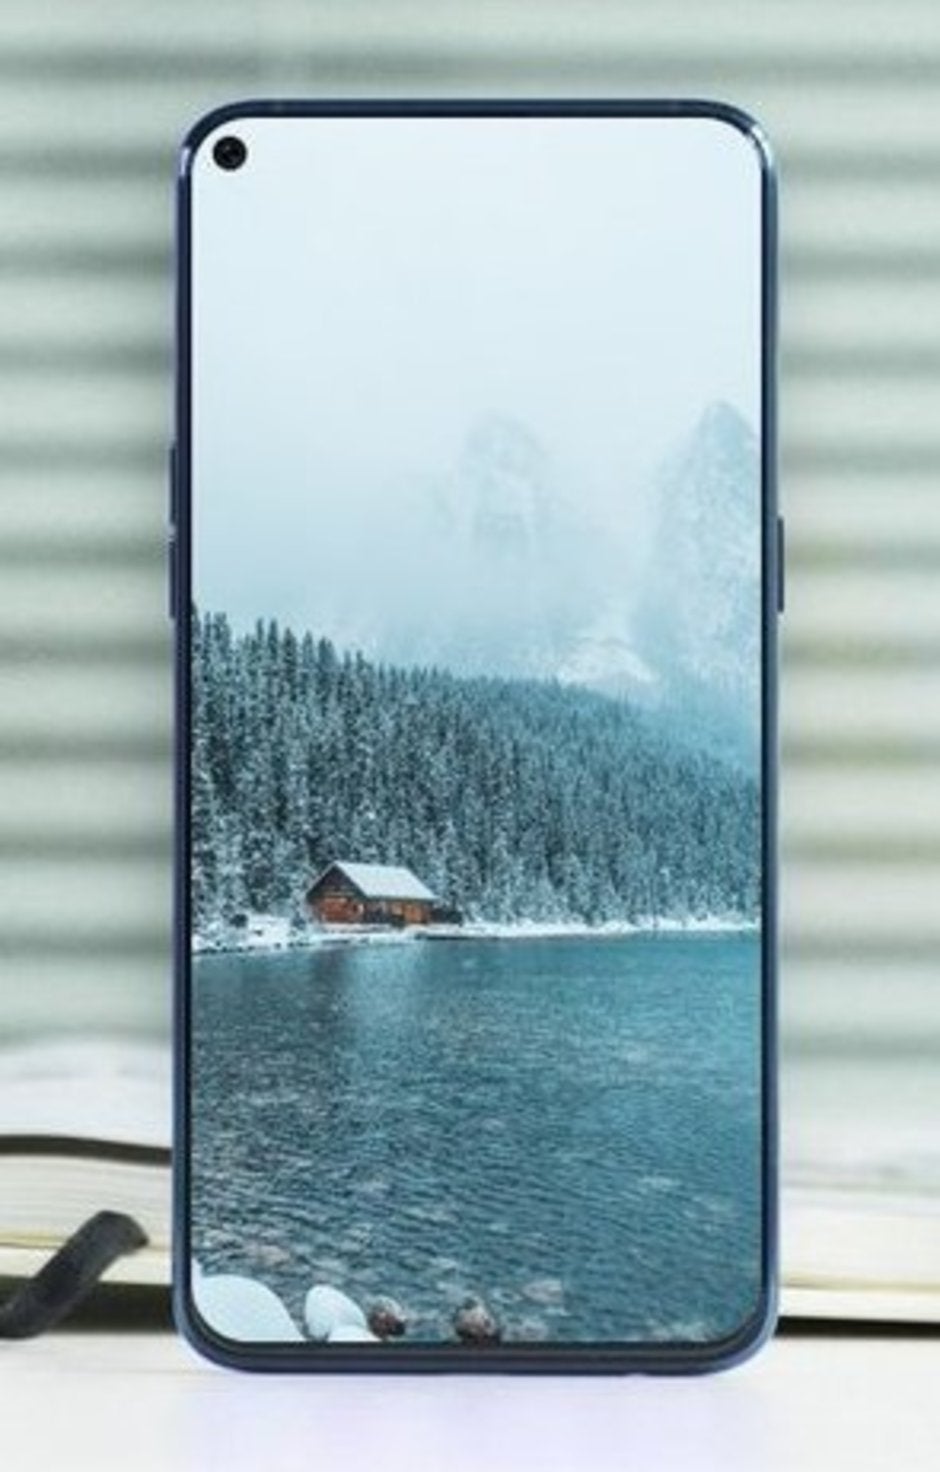 A concept of what Samsung&#039;s Infinity-O panel could look like - The Galaxy S10 will probably use Samsung&#039;s new Infinity-O display